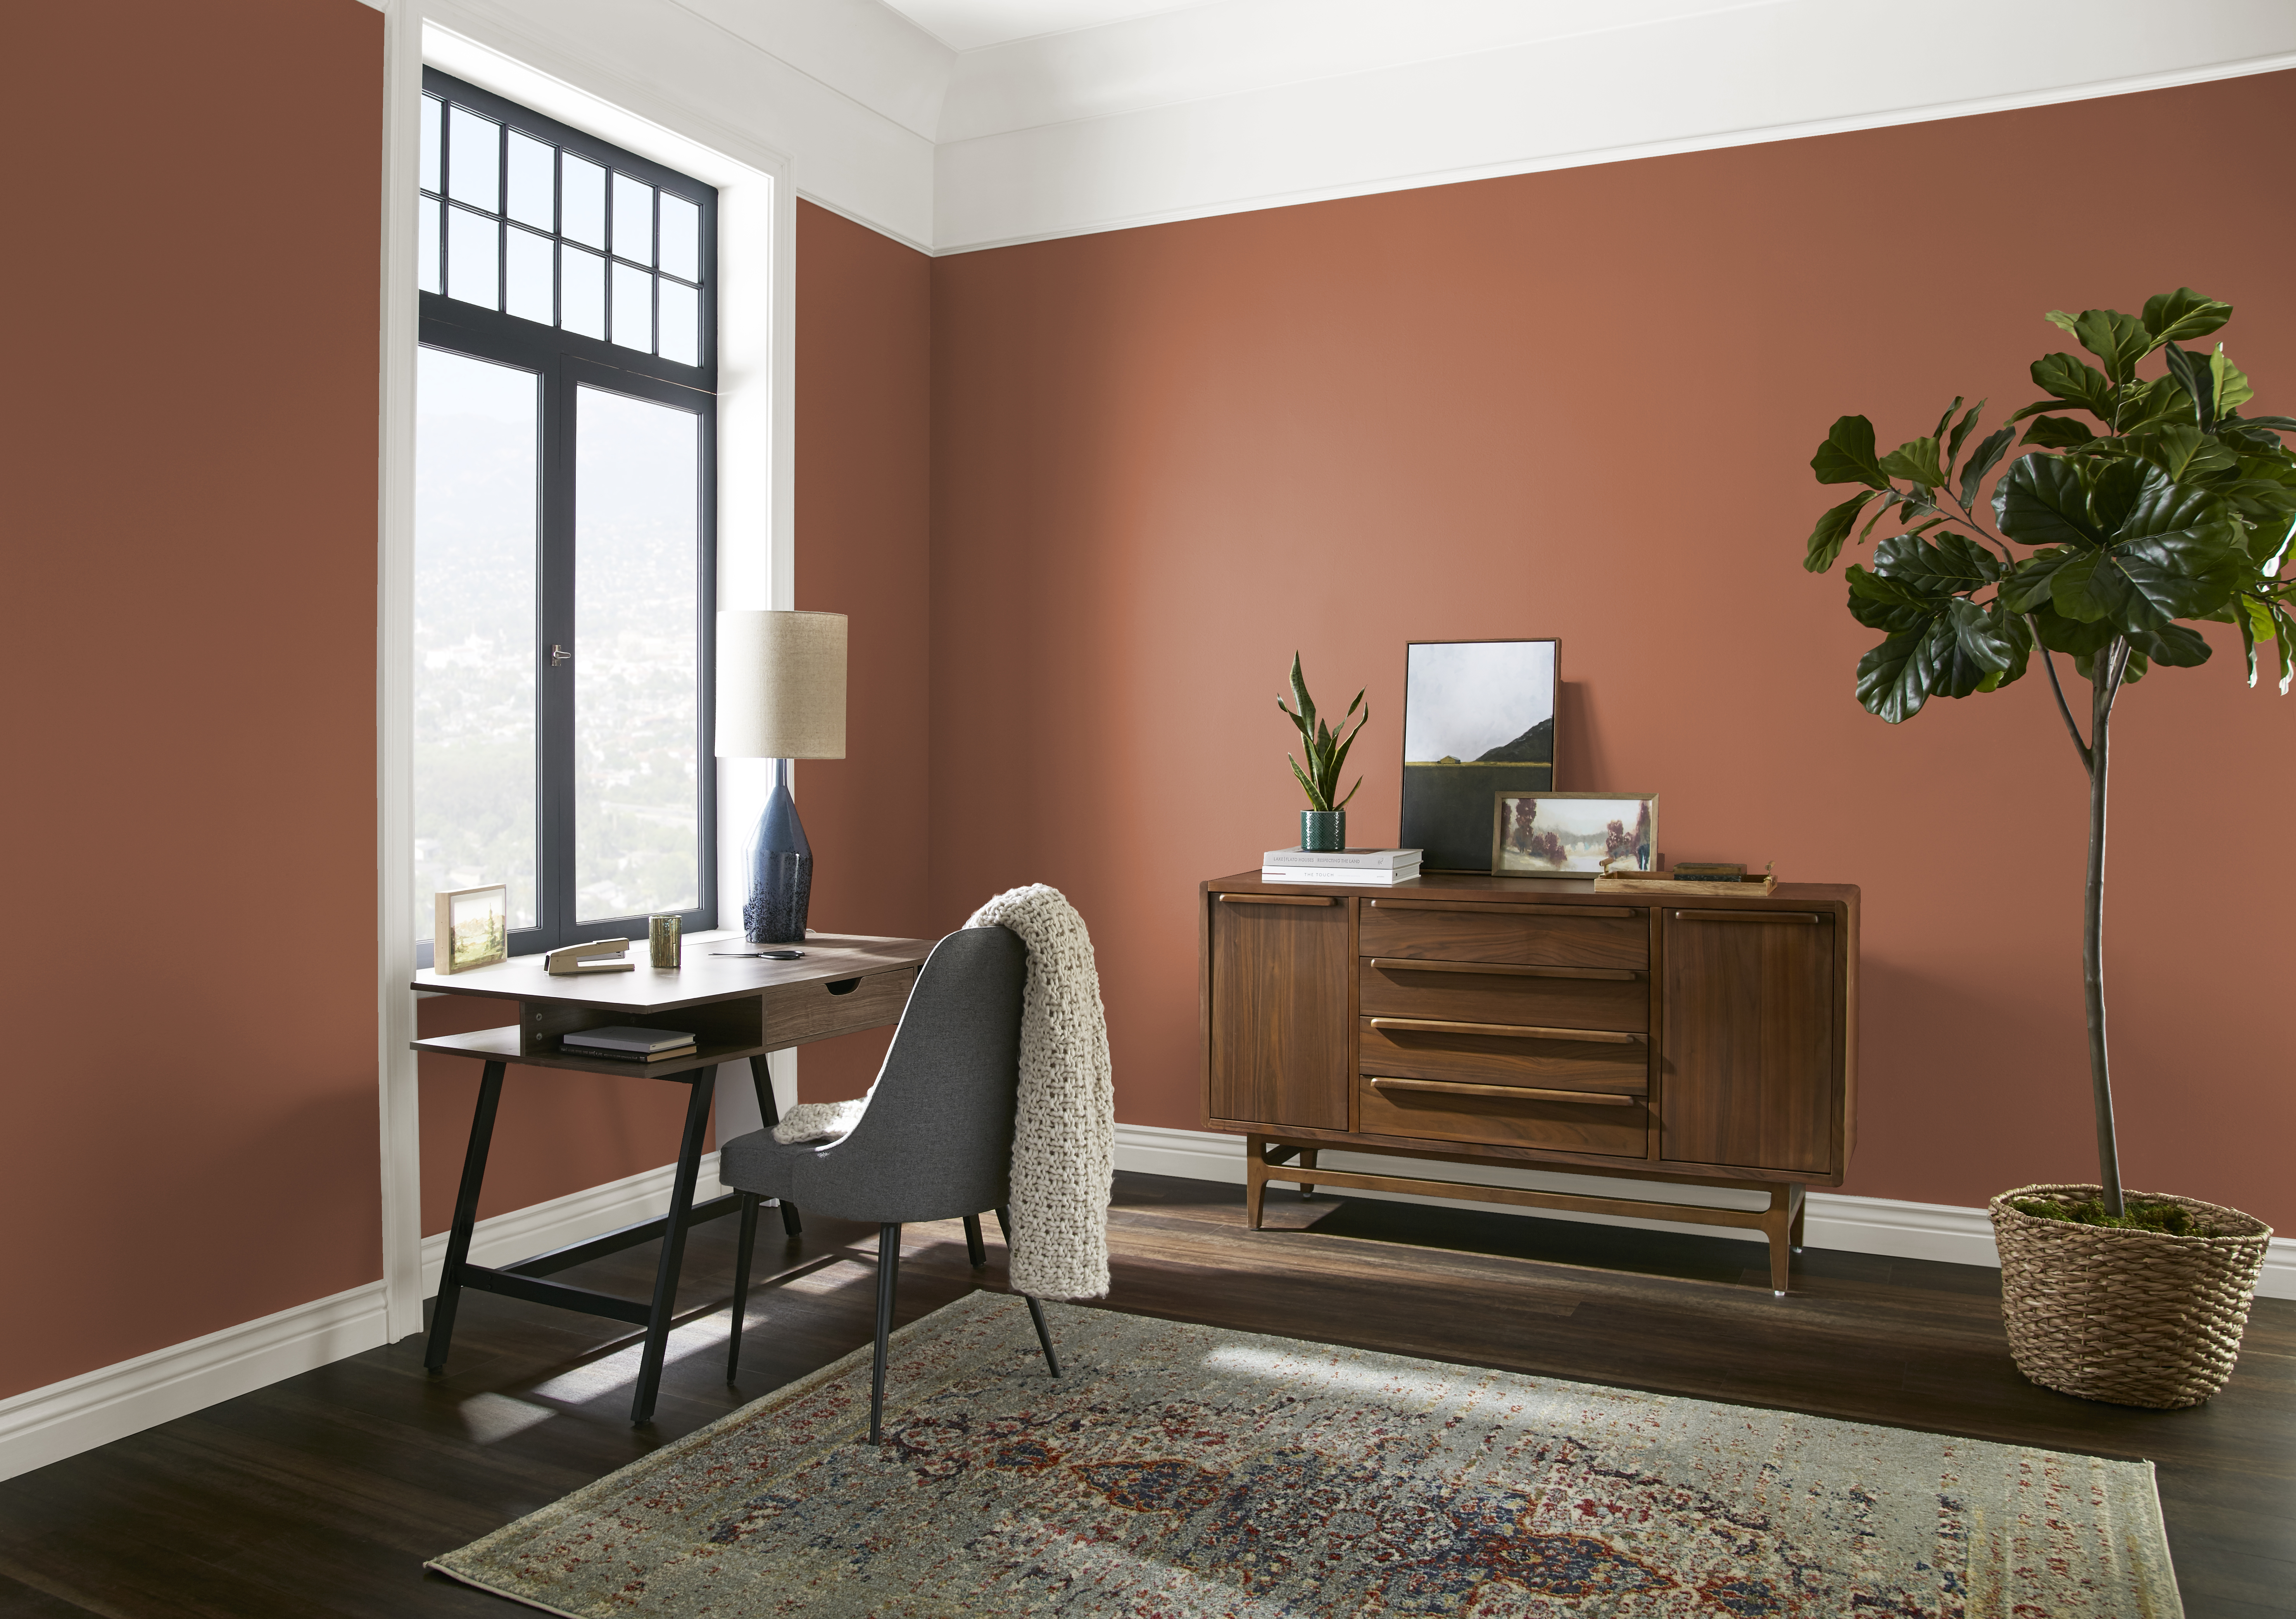 The corner of a room with walls in the colour Orange Flame and styled with neutral mid-century modern furniture